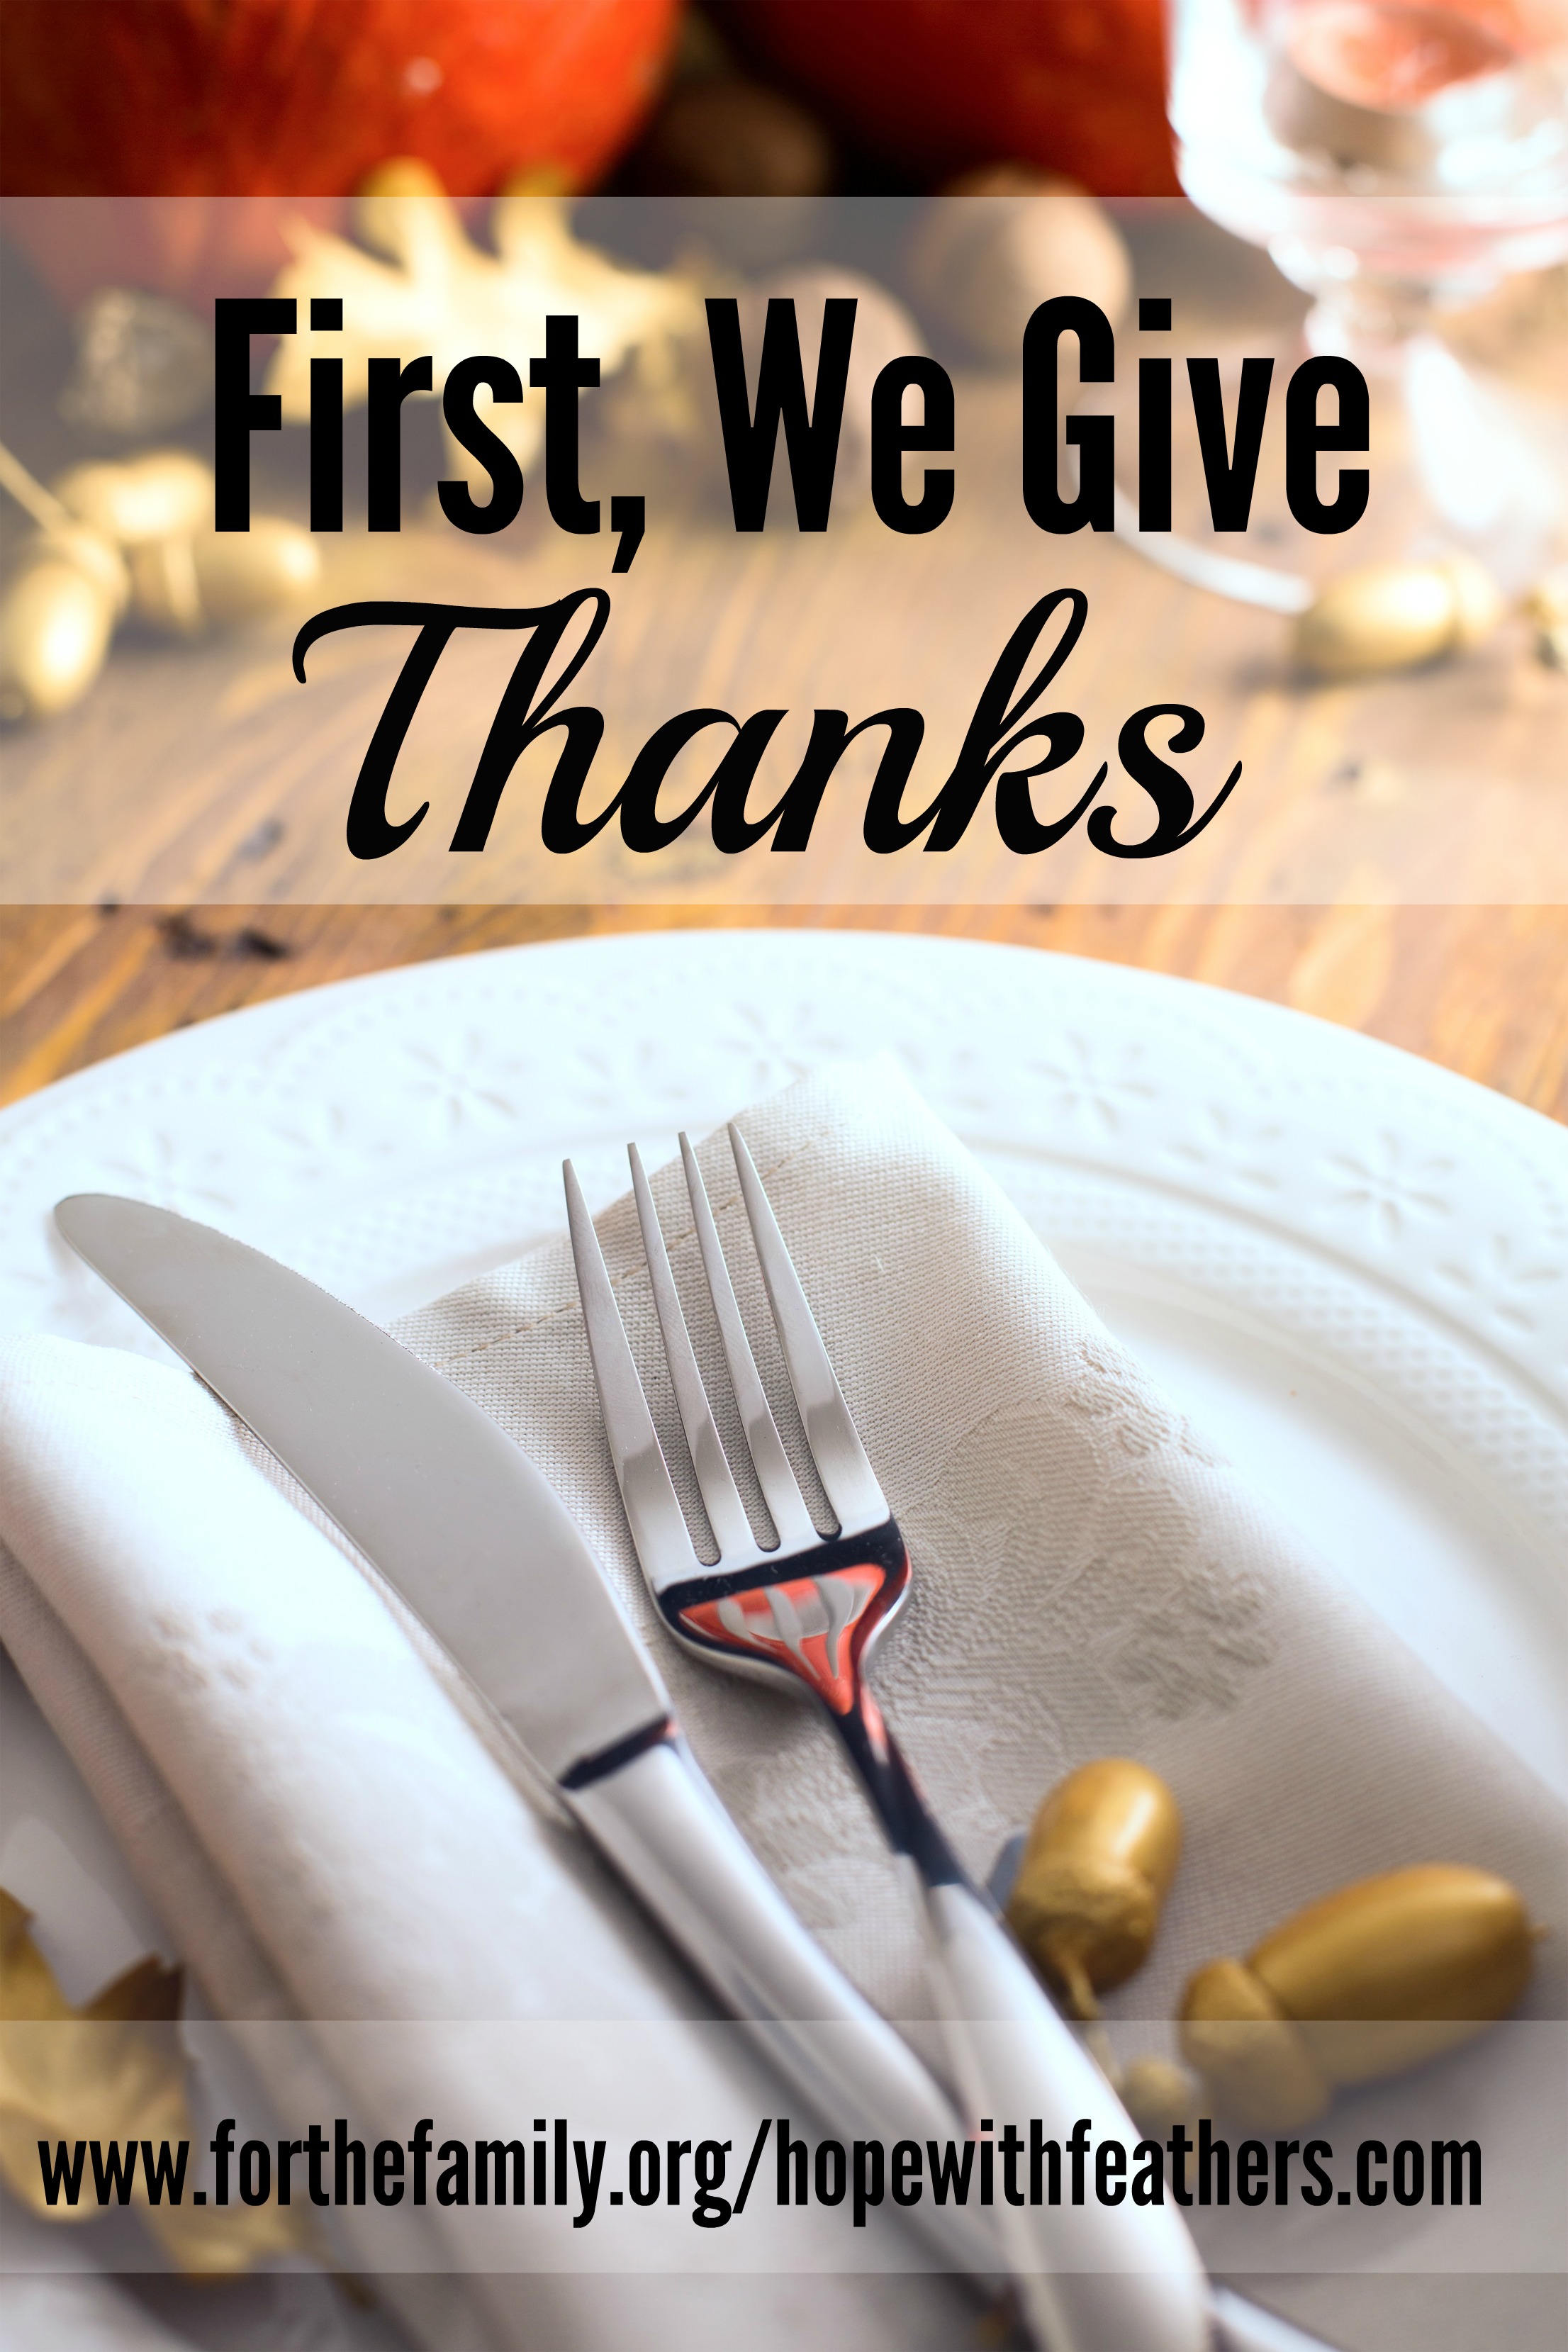 First, We Give Thanks